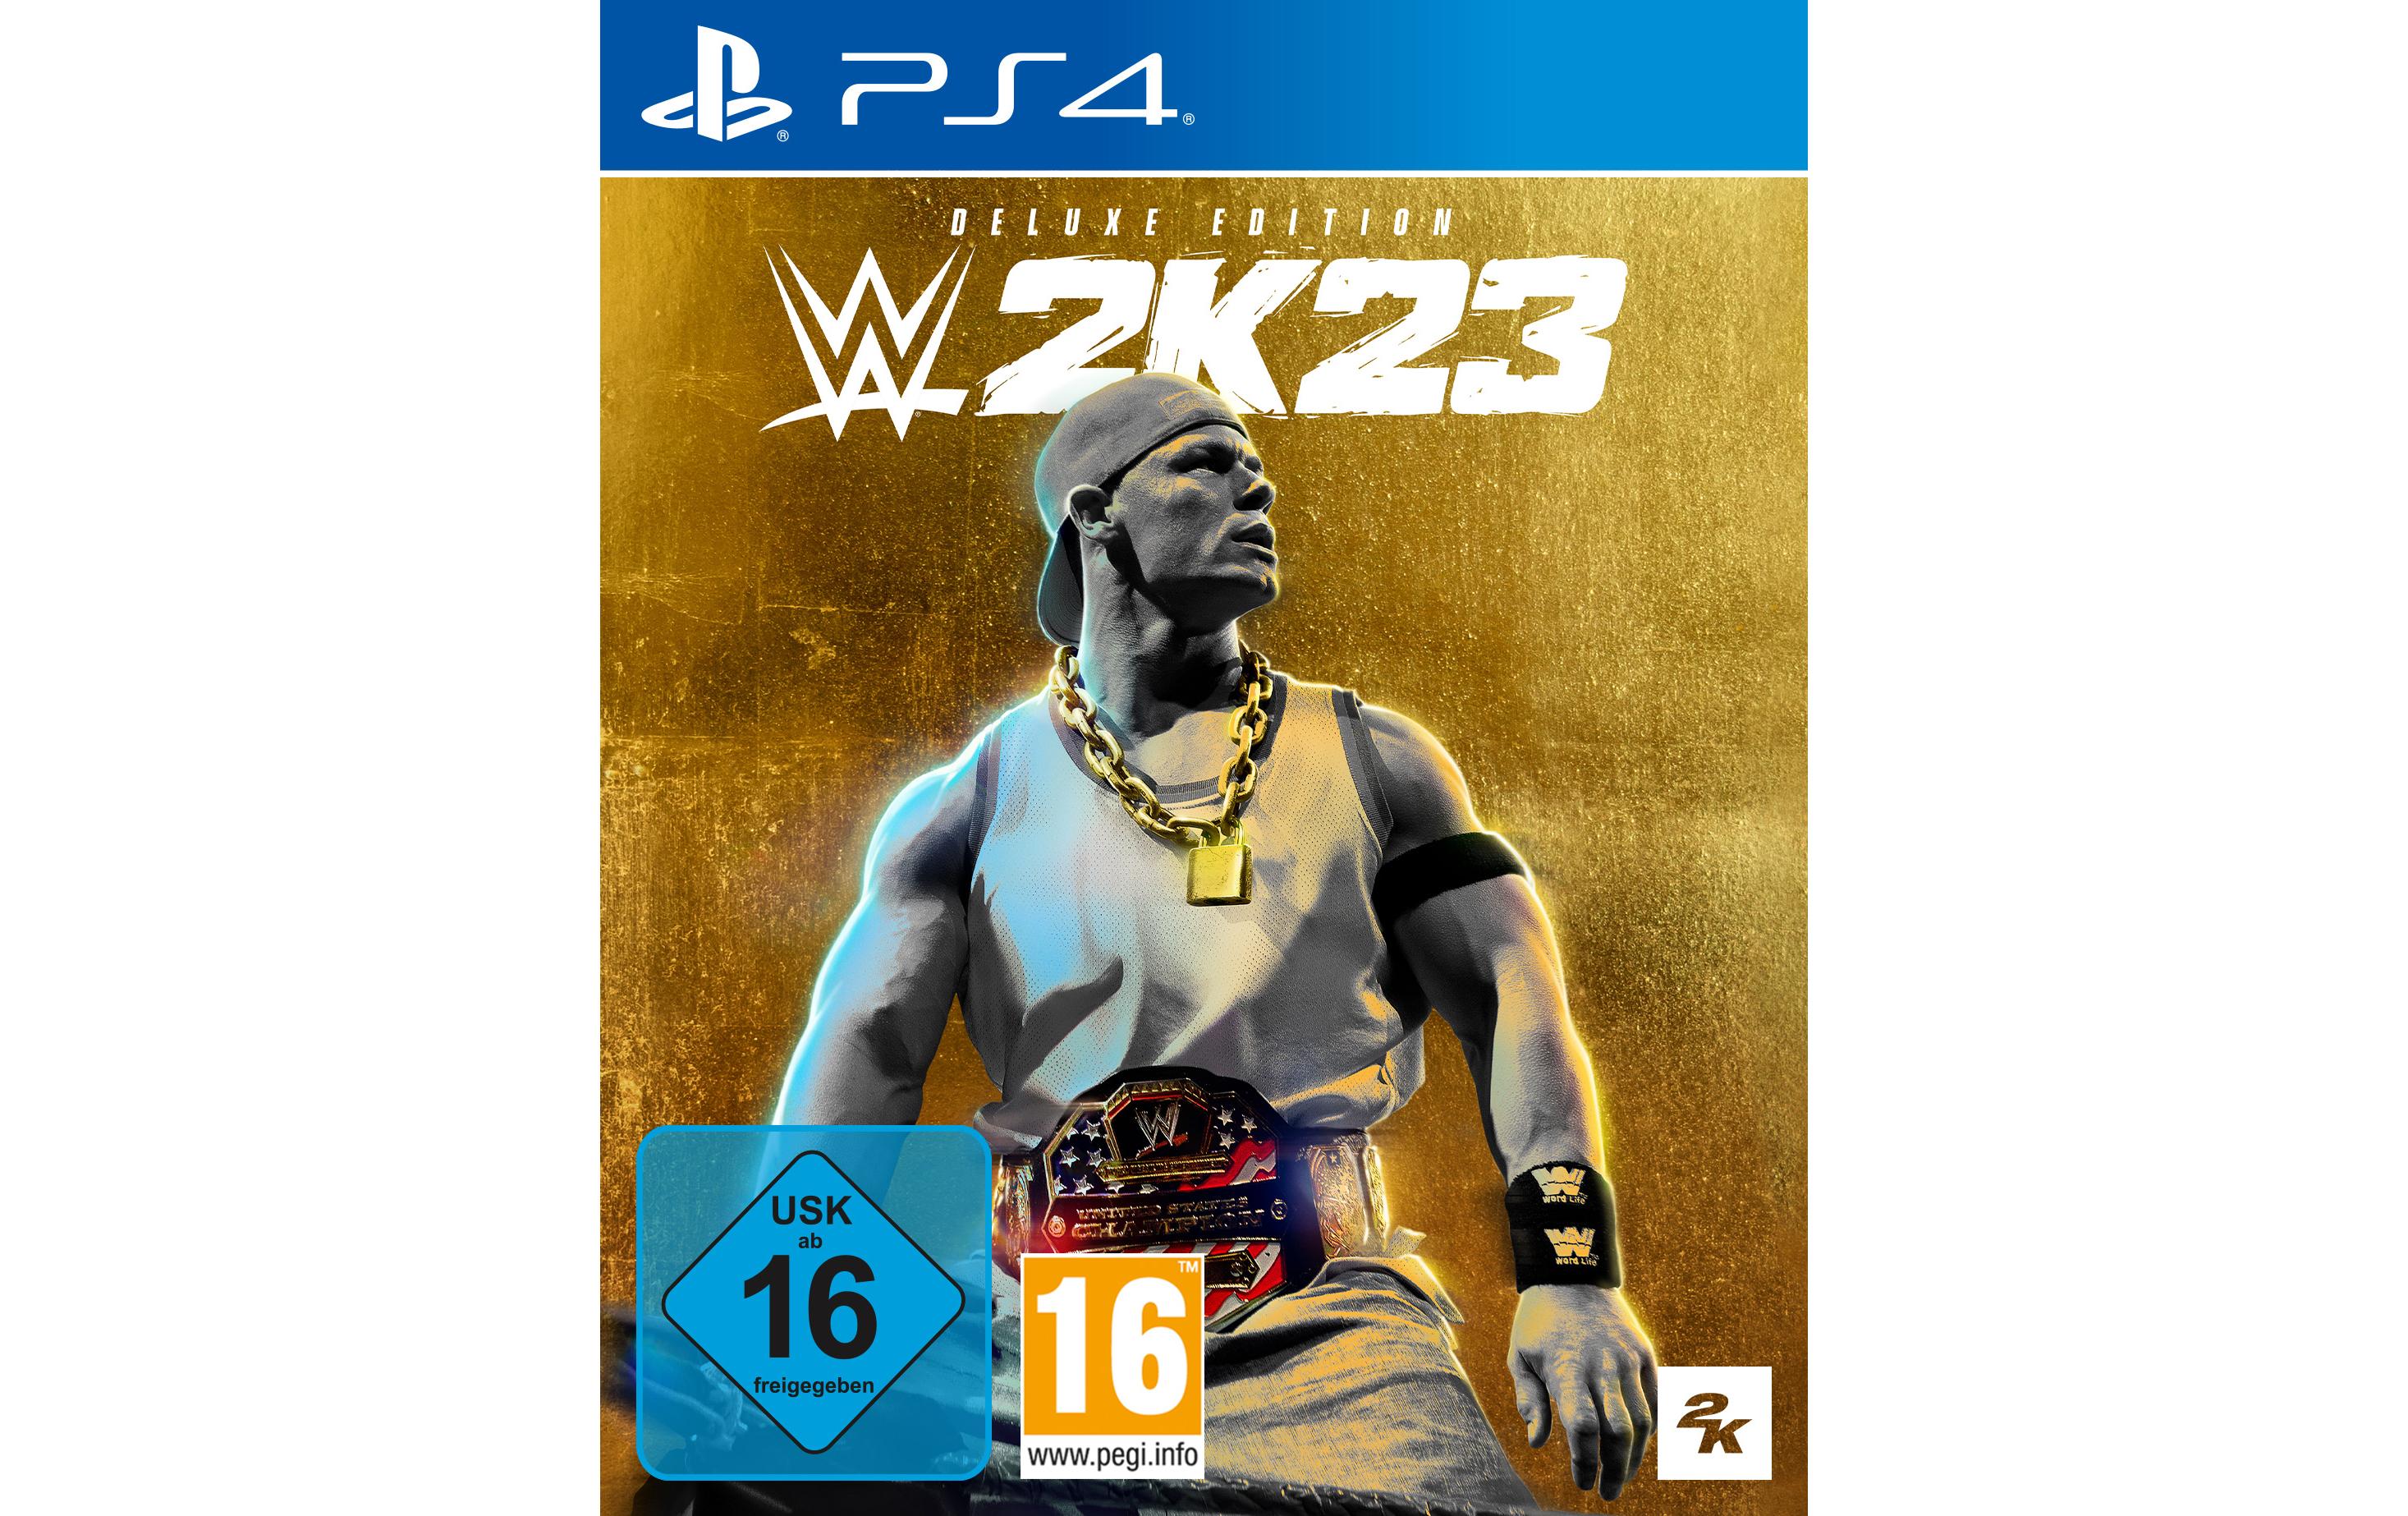 Take 2 WWE 2K23 Deluxe Edition